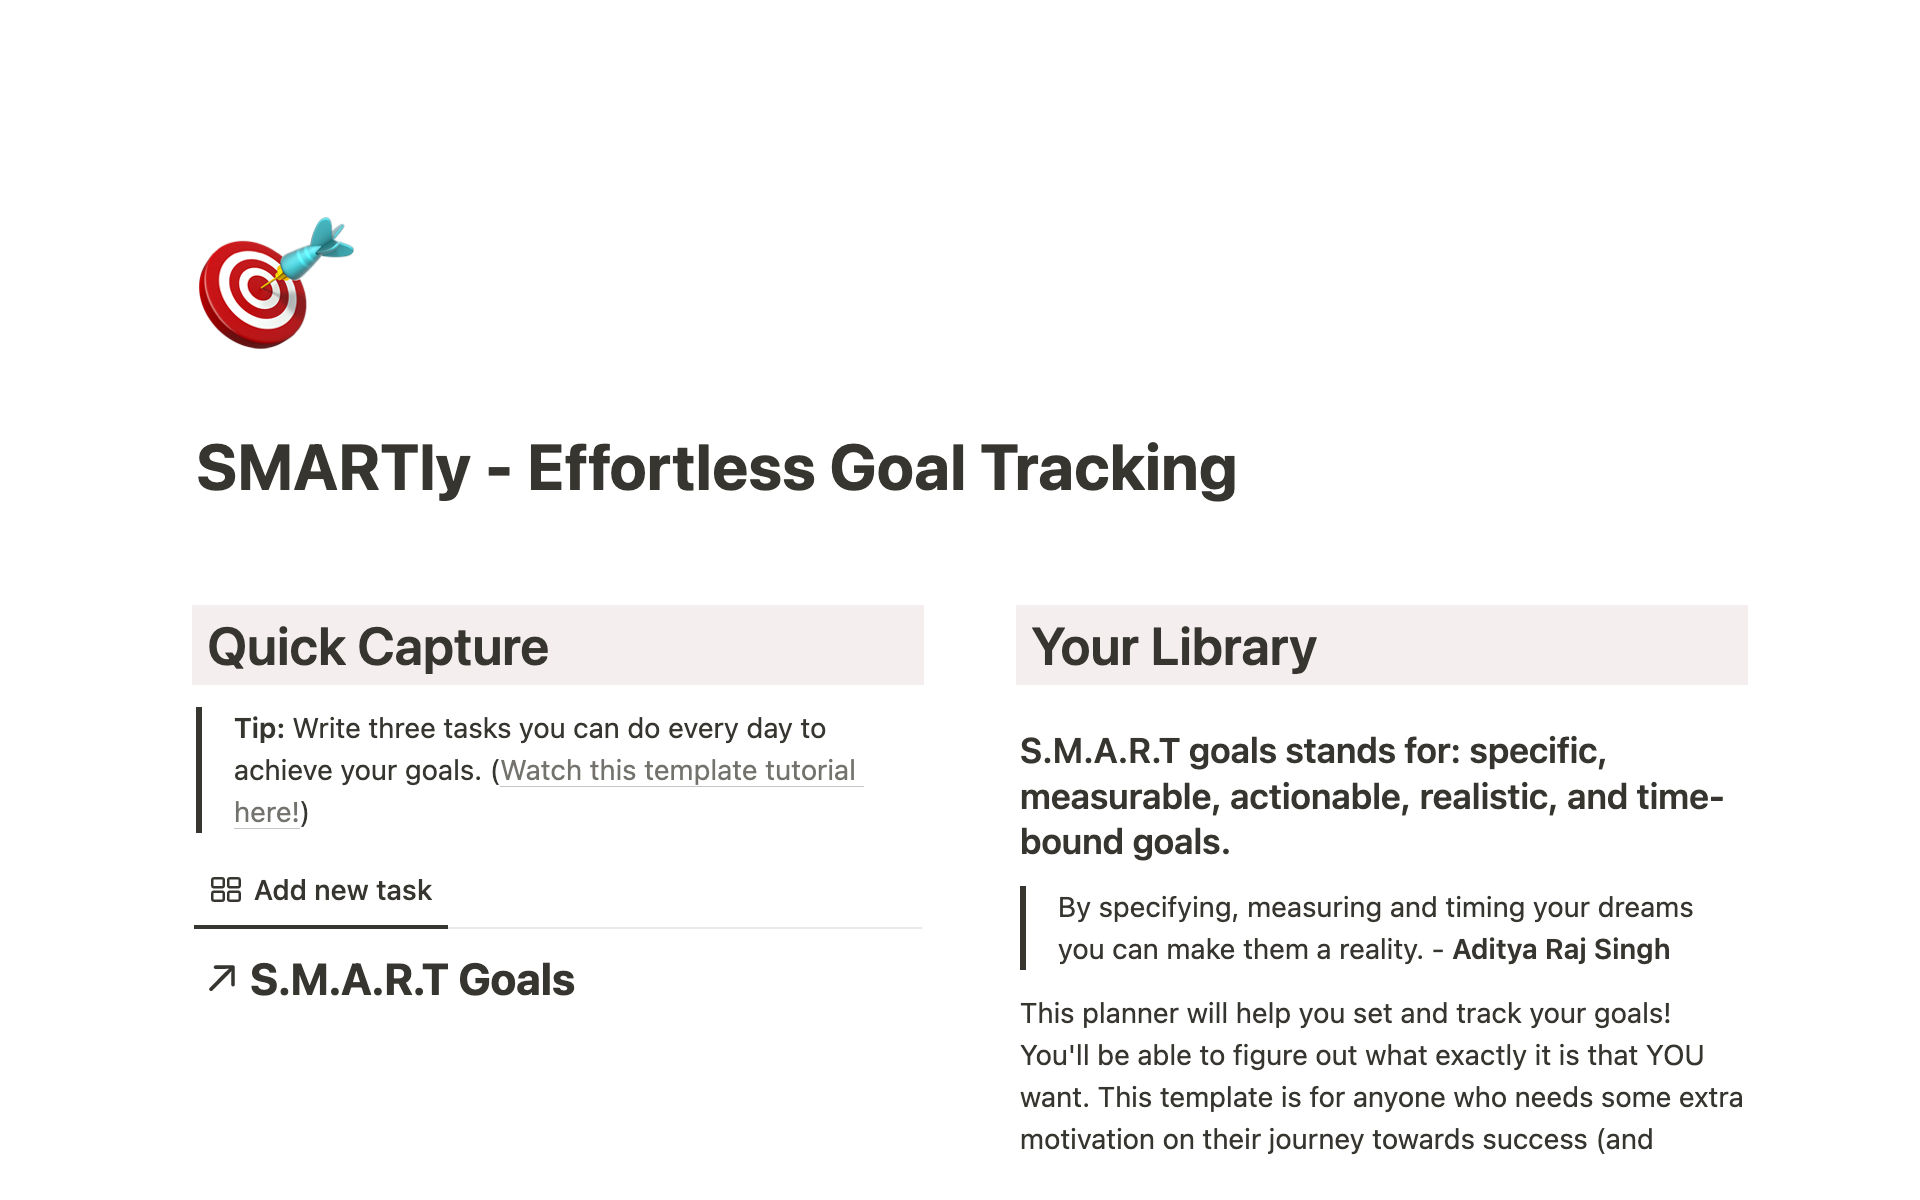 My template helps people achieve their goals using the SMART method, which stands for Specific, Measurable, Actionable, Realistic, and Time-Bound.